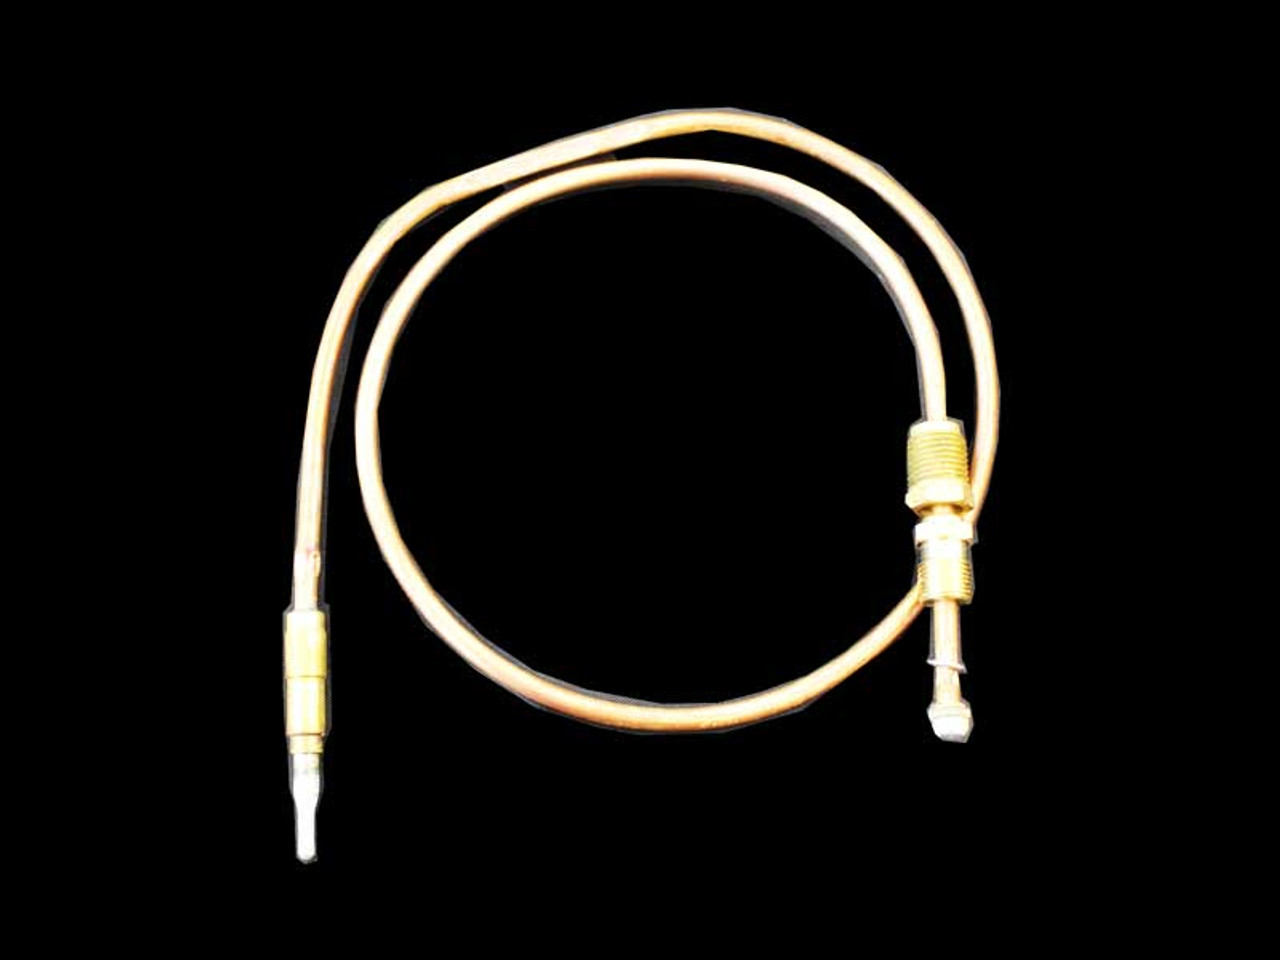 HHT 24D0808 THERMOCOUPLE FIREPLACE THERMOCOUPLE 